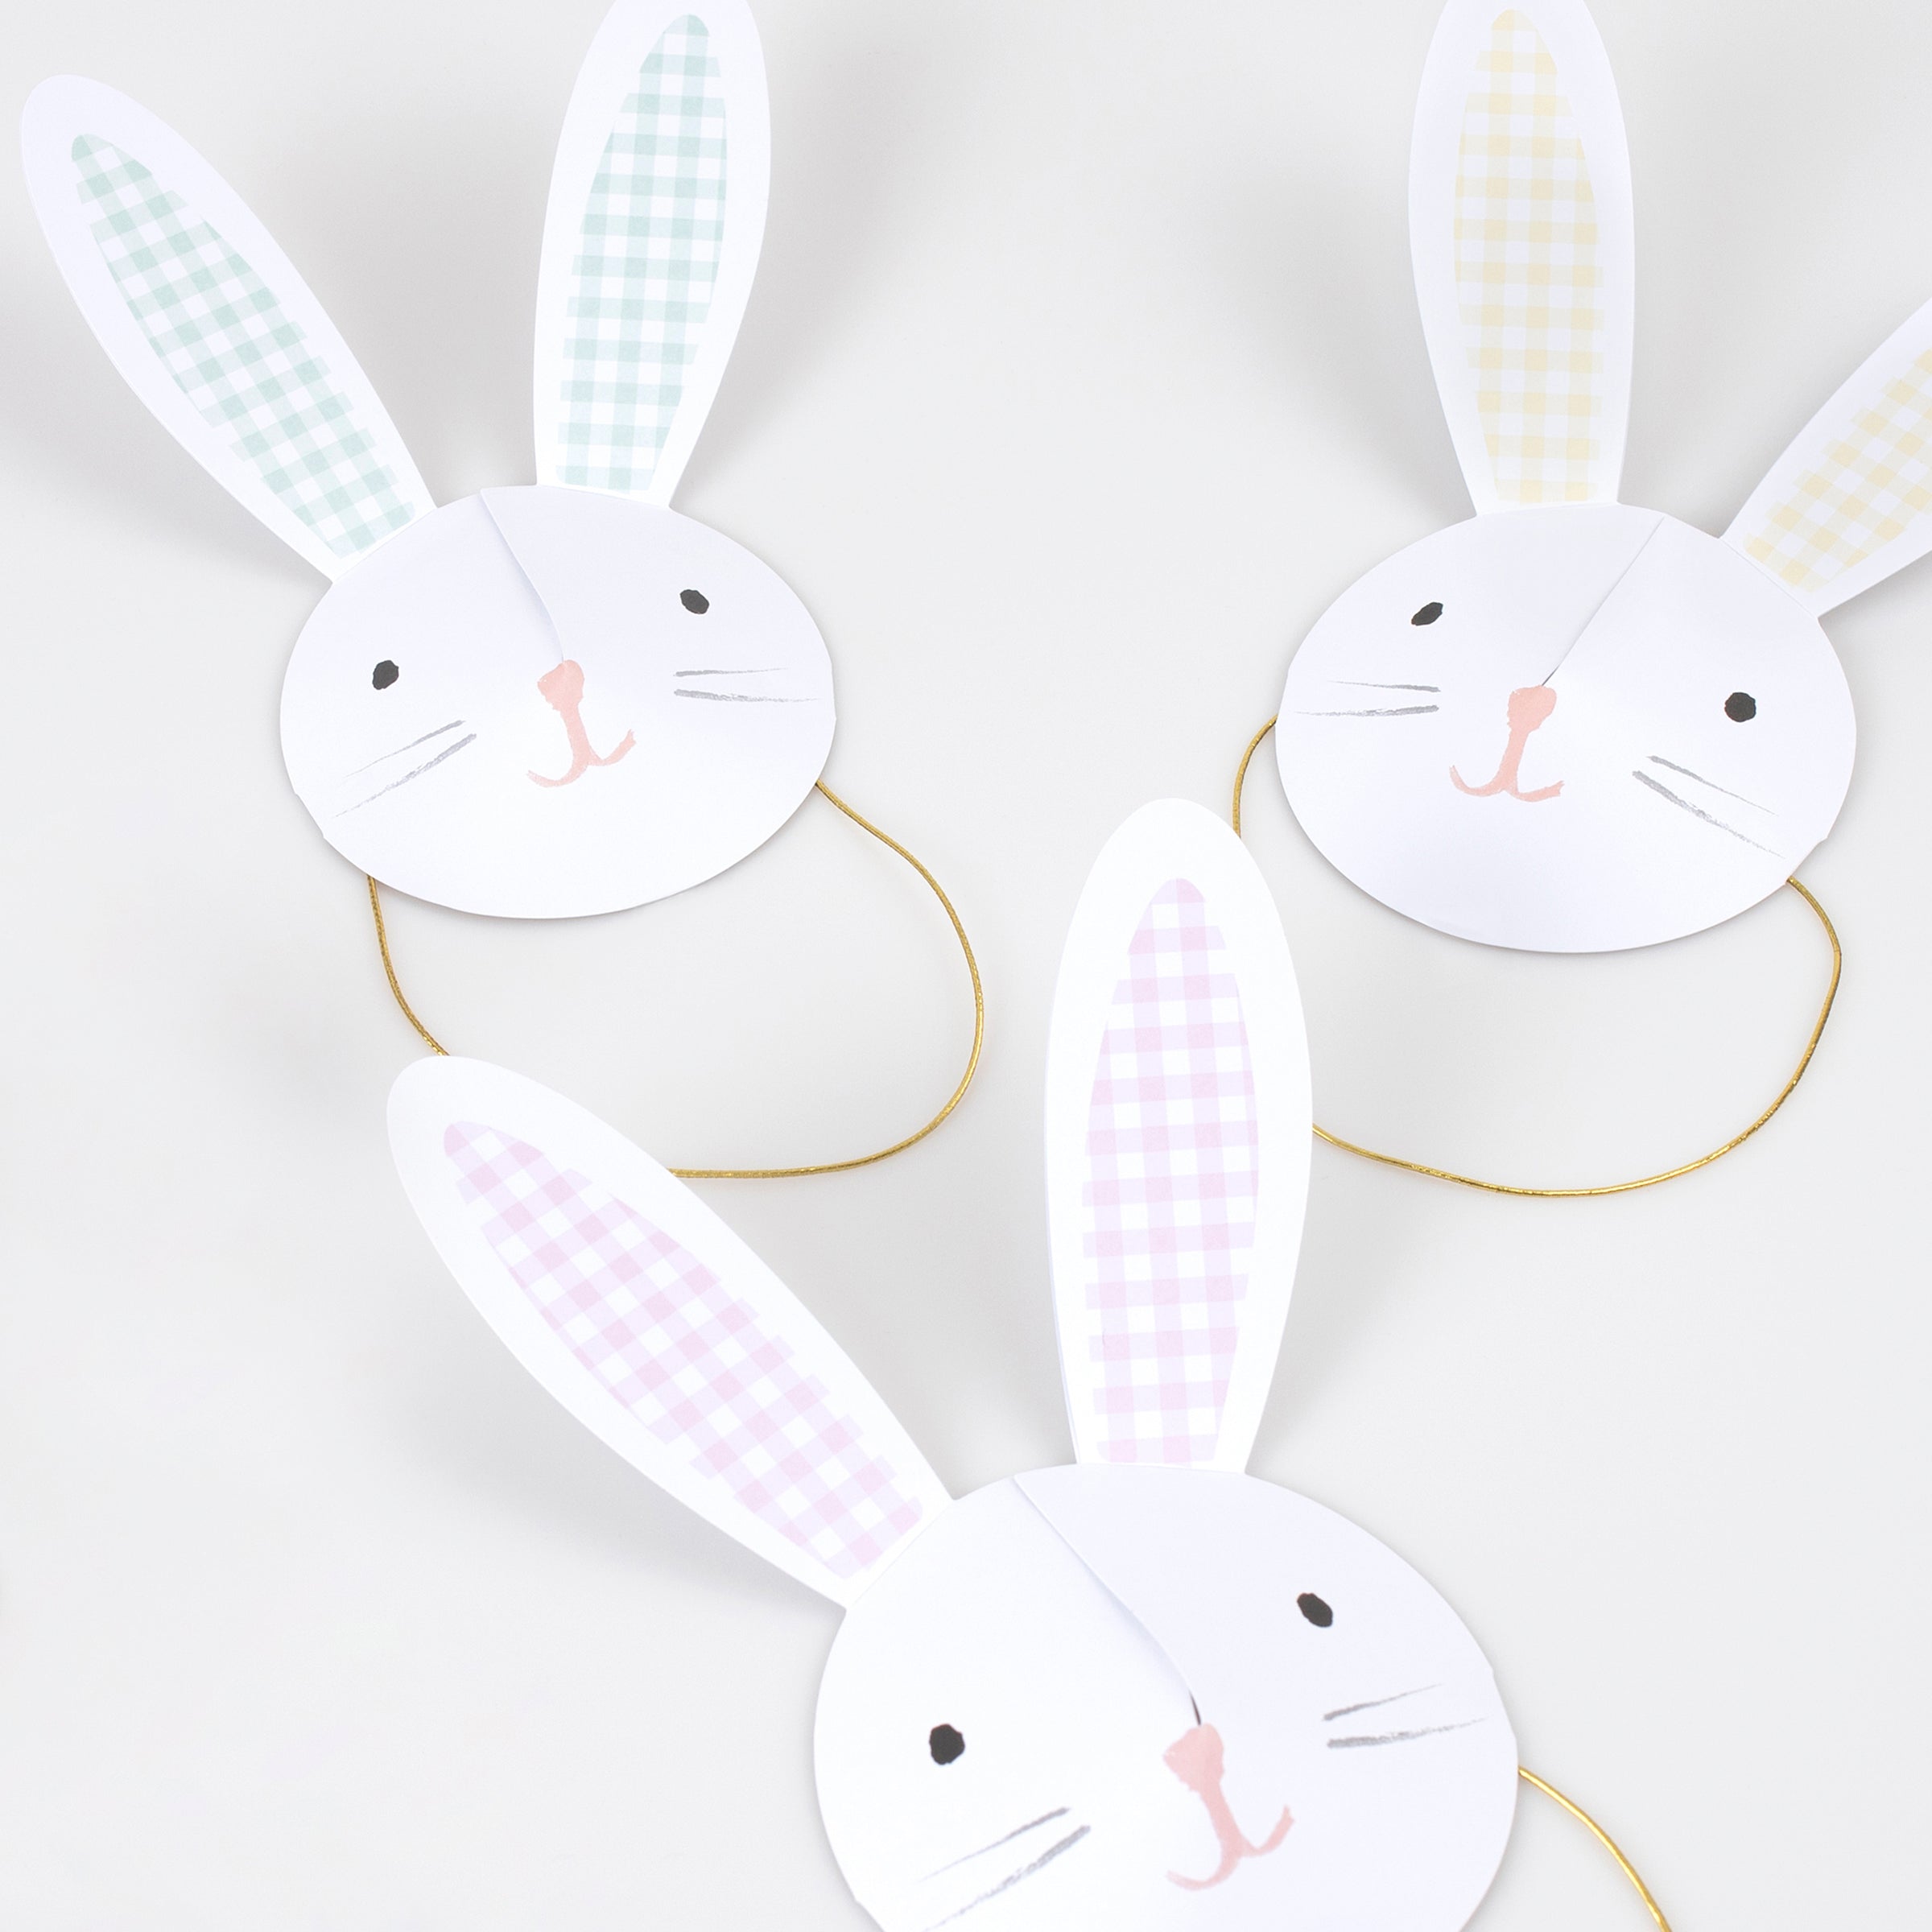 Our Easter hats feature adorable bunny ears and faces with on-trend gingham designs.